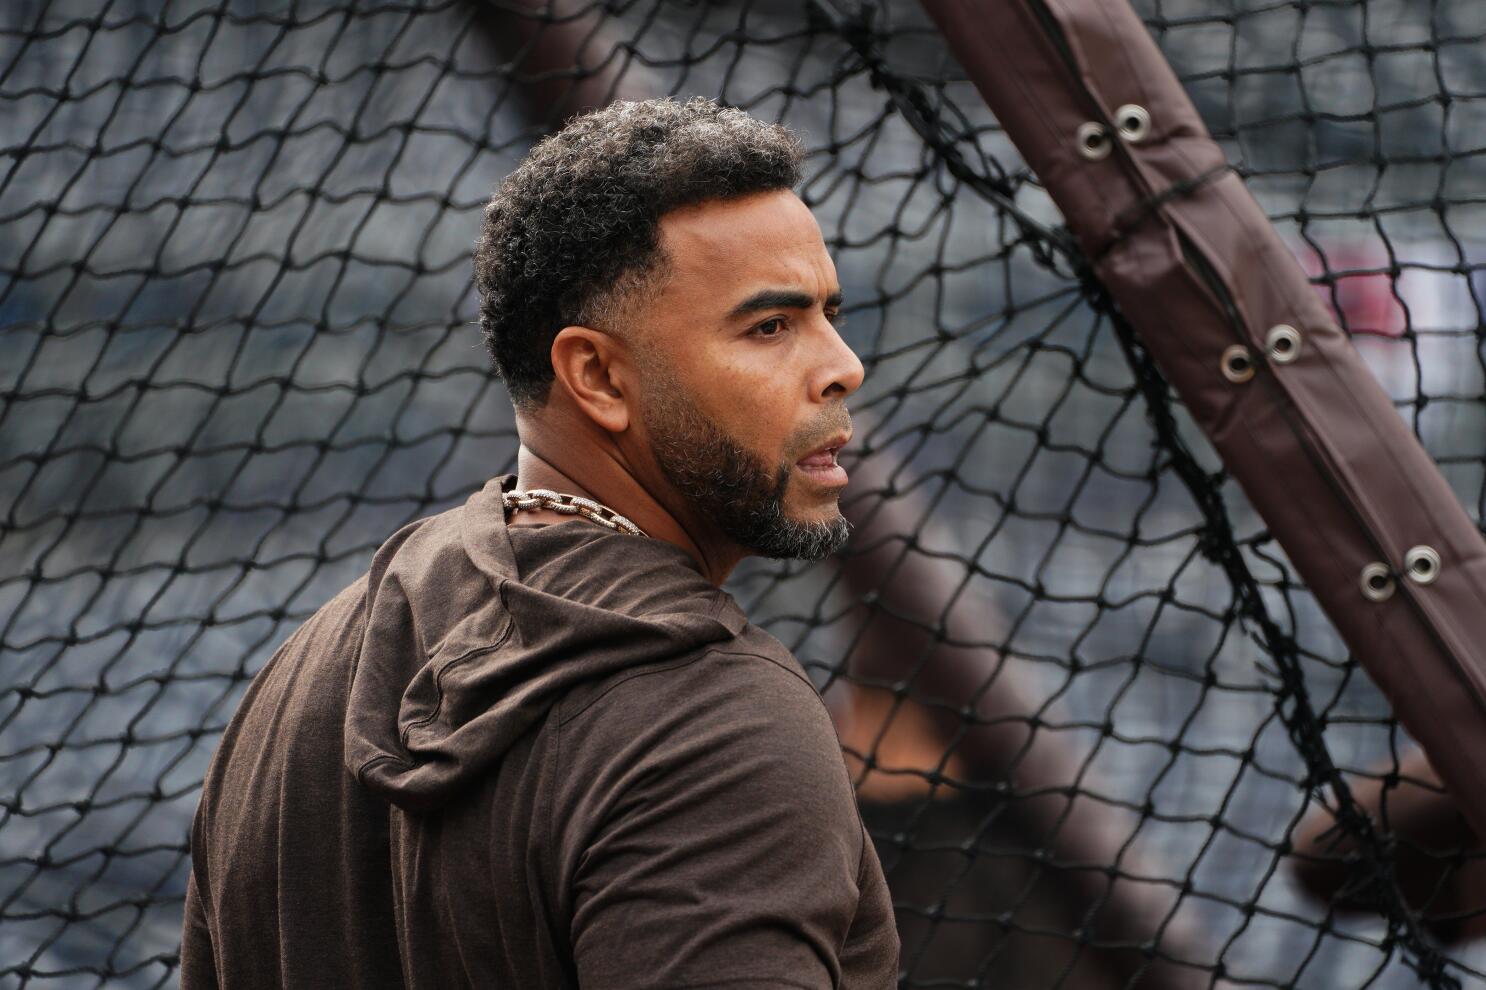 Nelson Cruz makes his appearance playing with the El Paso Chihuahuas